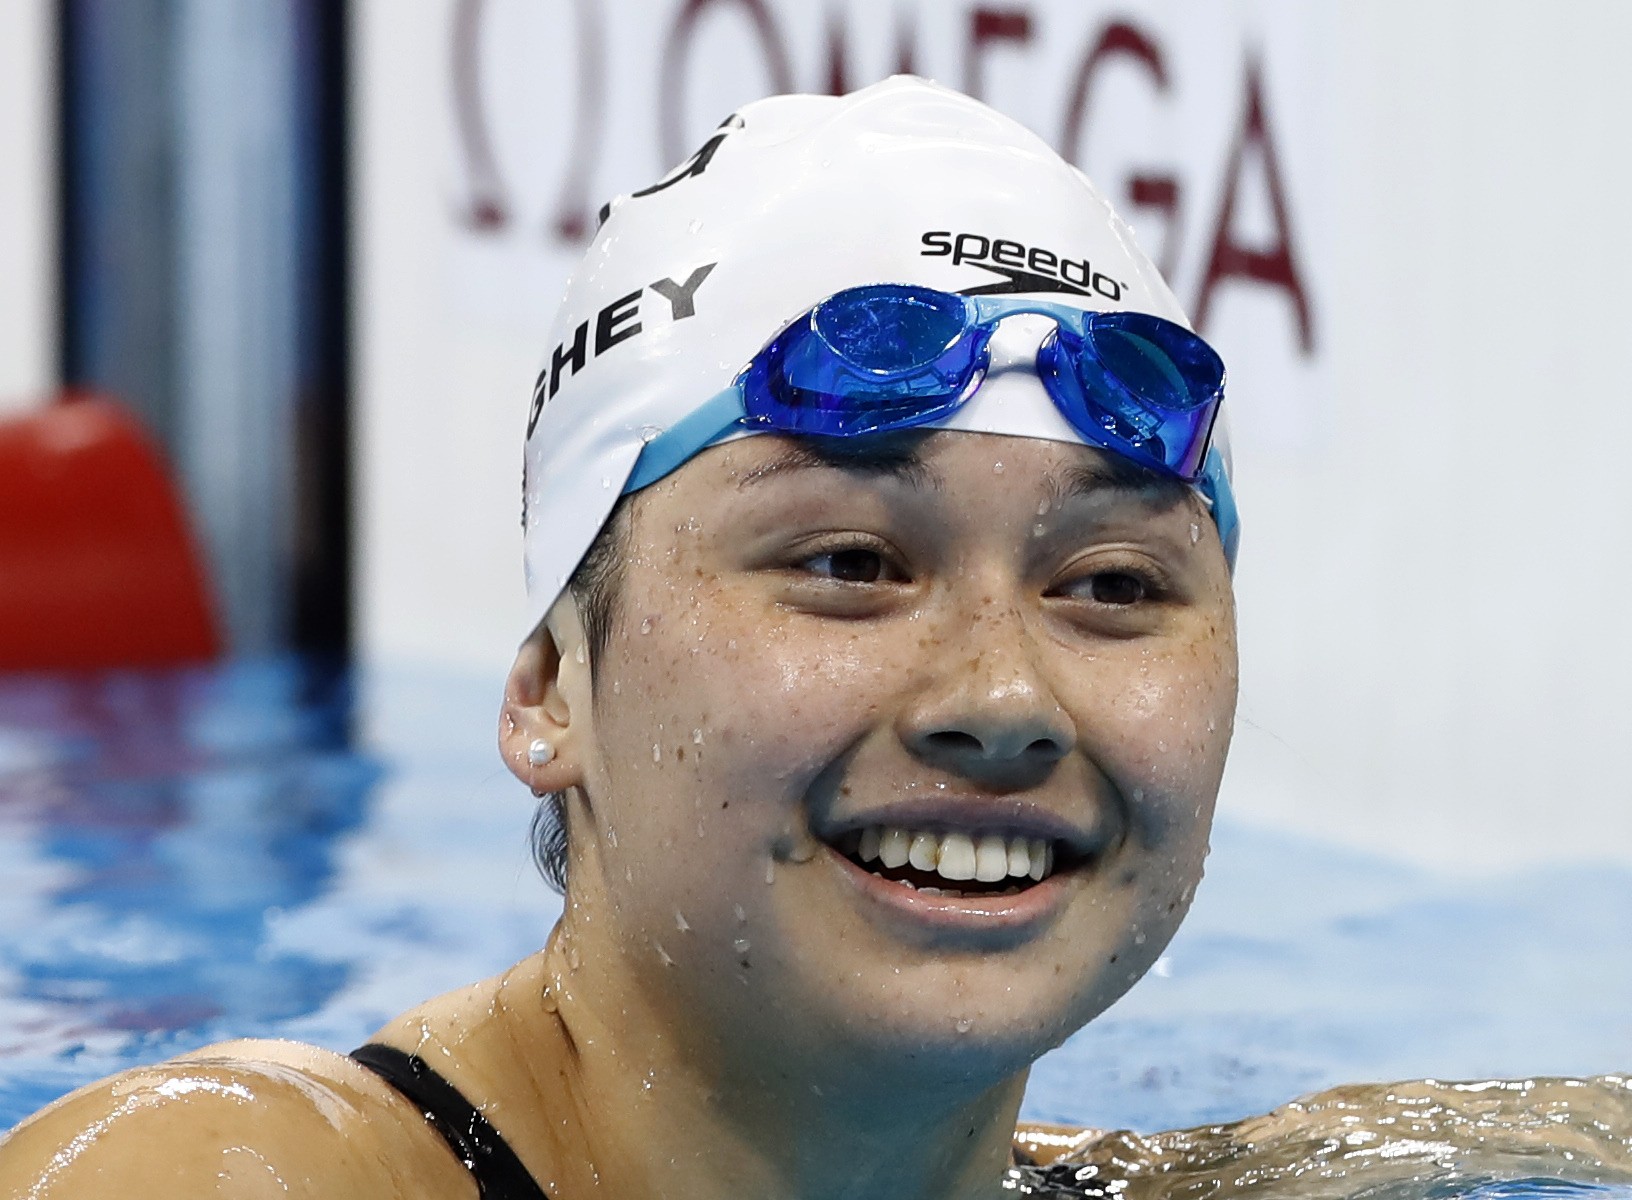 Siobhan Haughey will contest the final of the world championships in the 200-metre freestyle. Photo: Xinhua